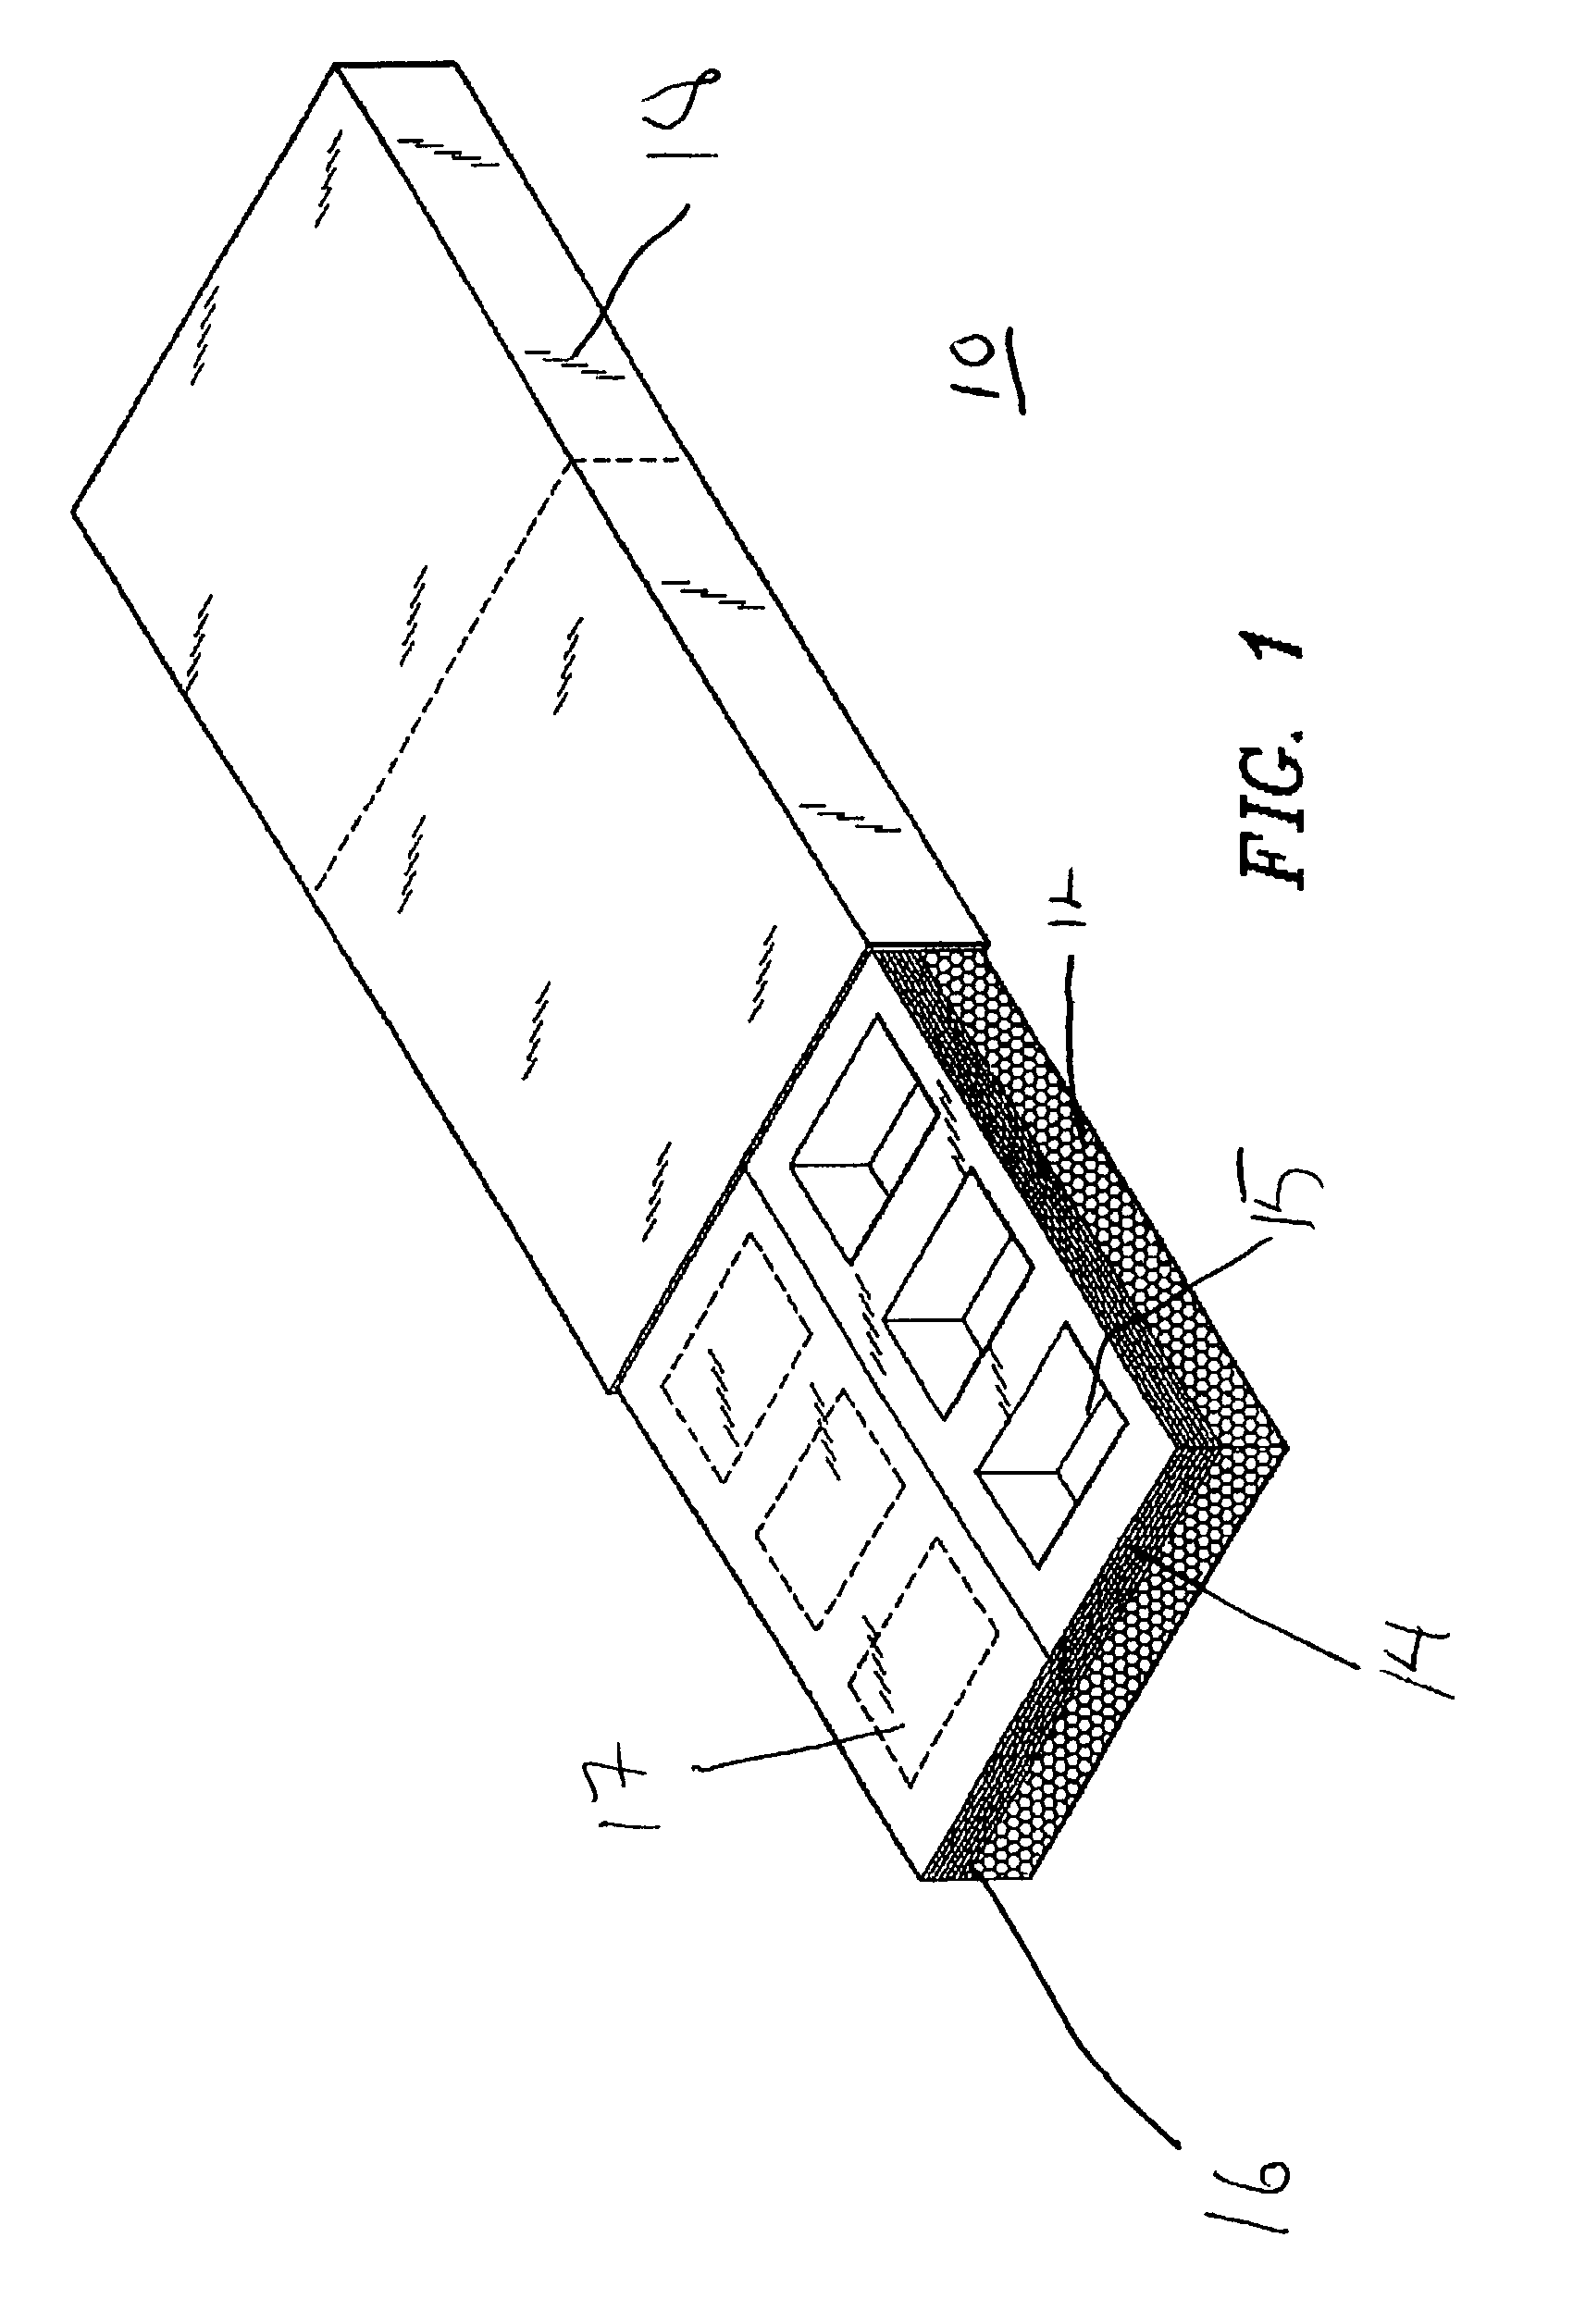 Product packaging material for individual temporary storage of pharmaceutical products